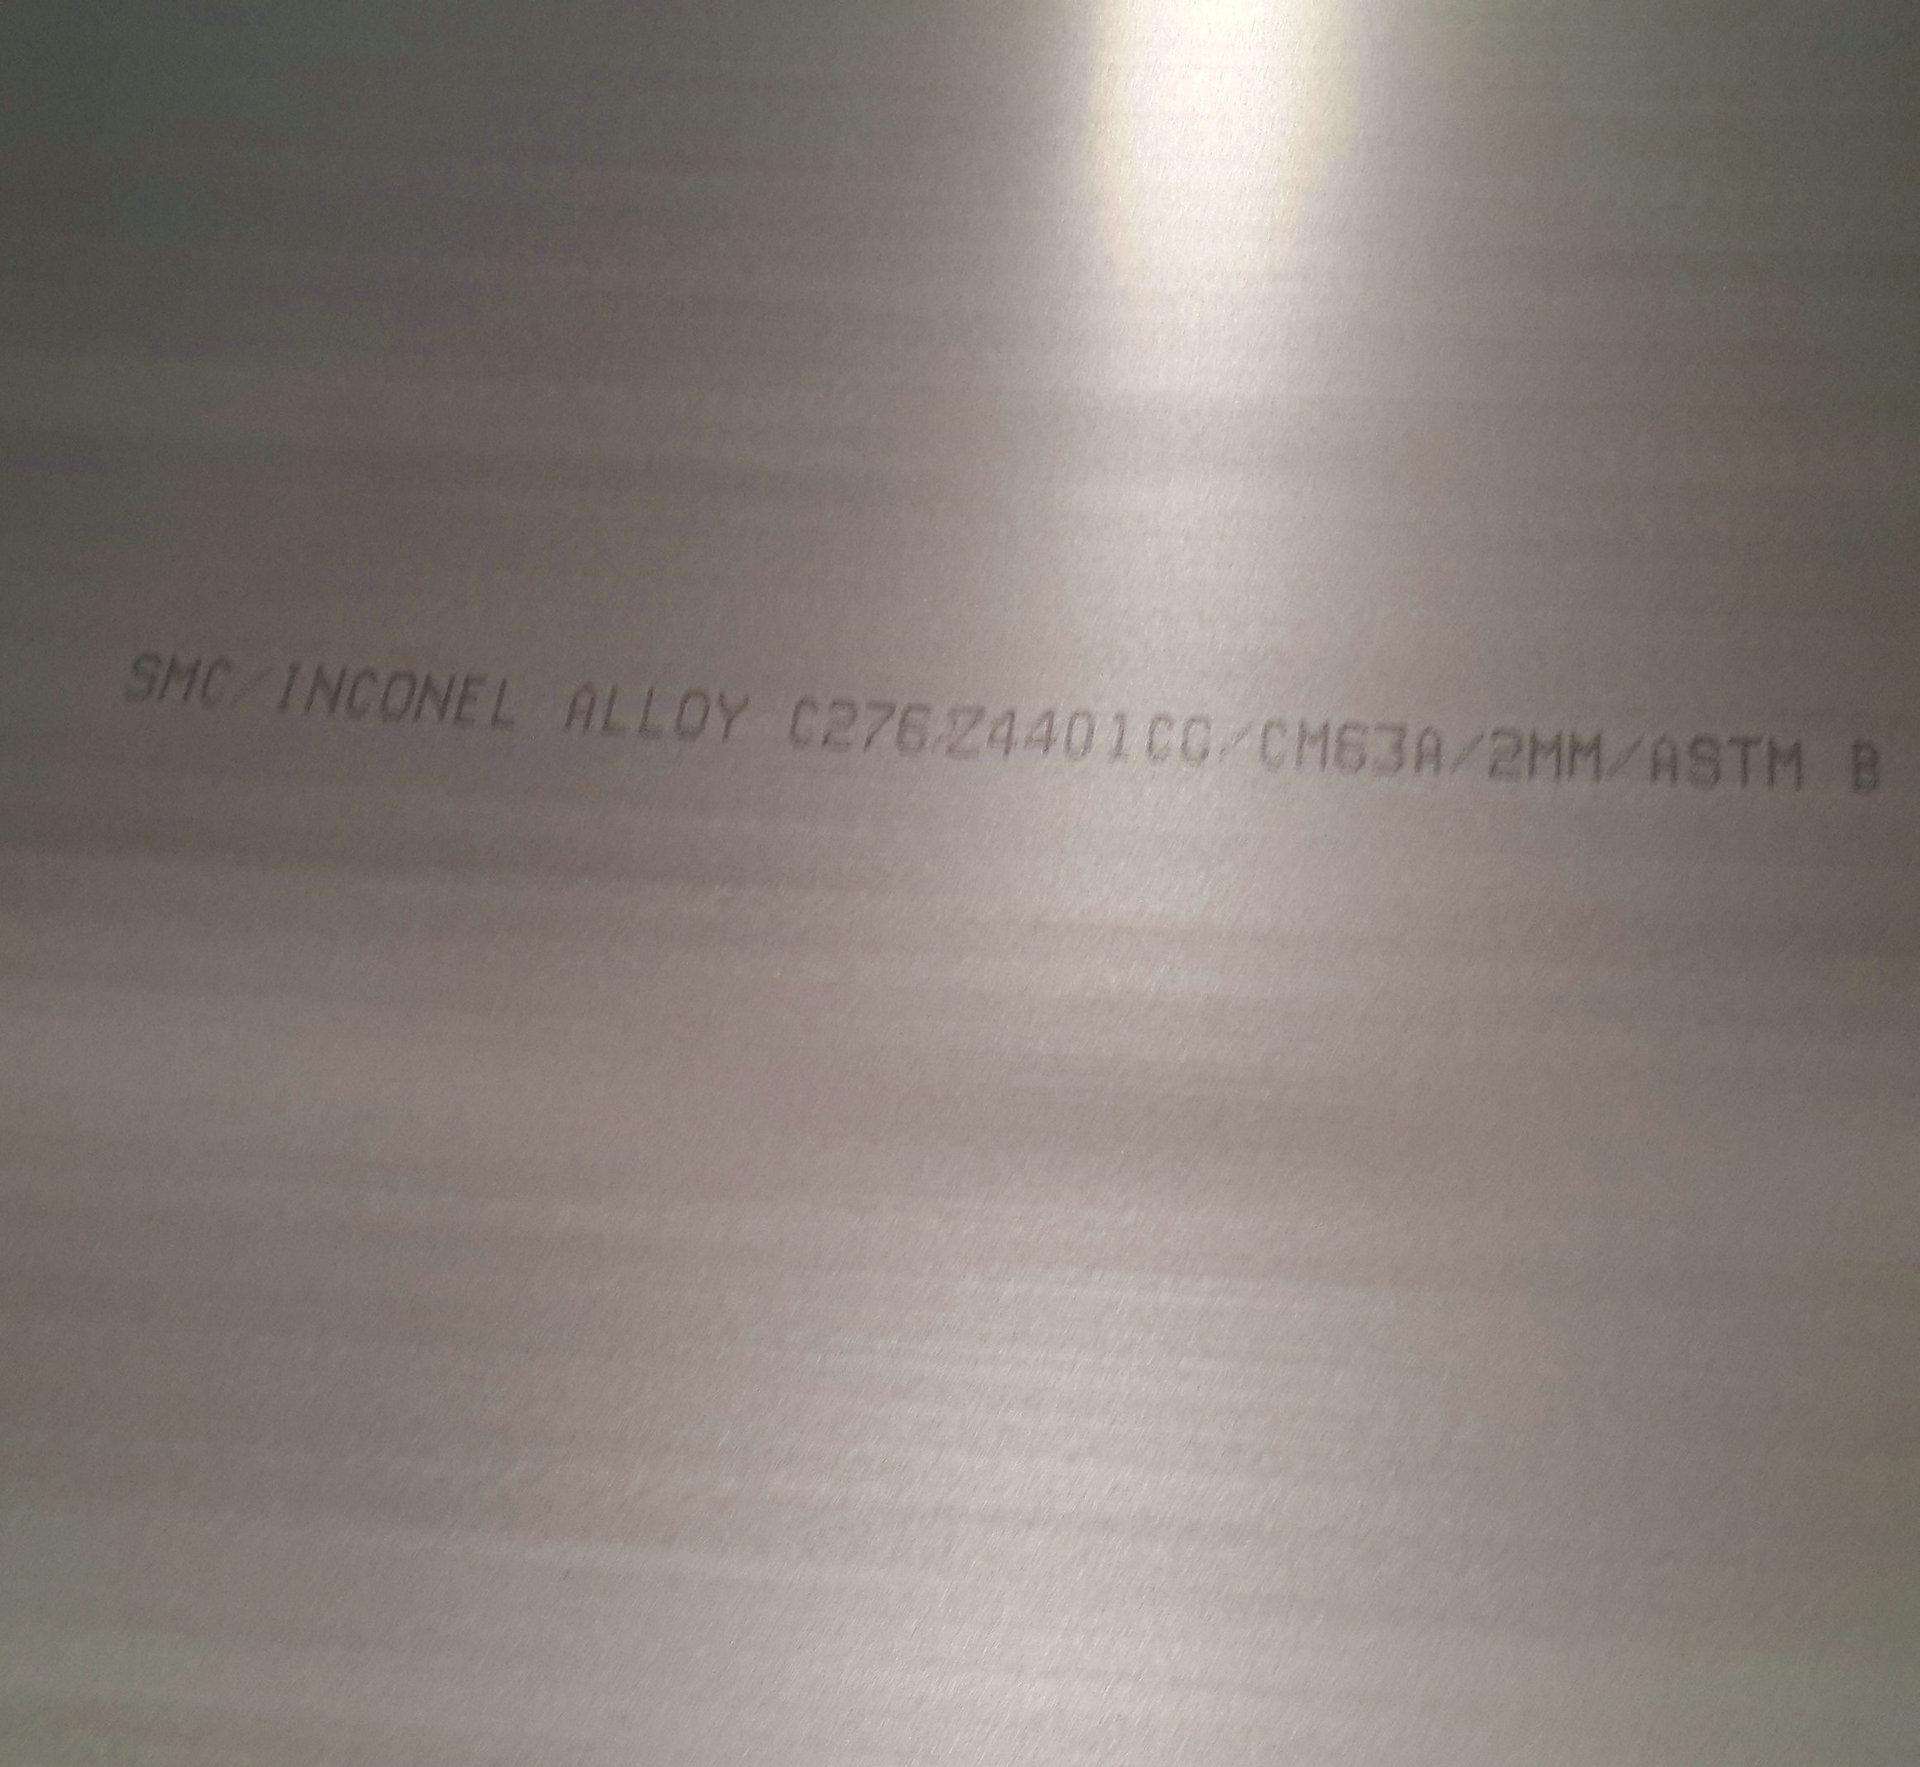 OEM China Grade 9 Titanium Tube - Nickel Alloy Plate/sheet inconel 600 601 625 X-750 718 825 – Join